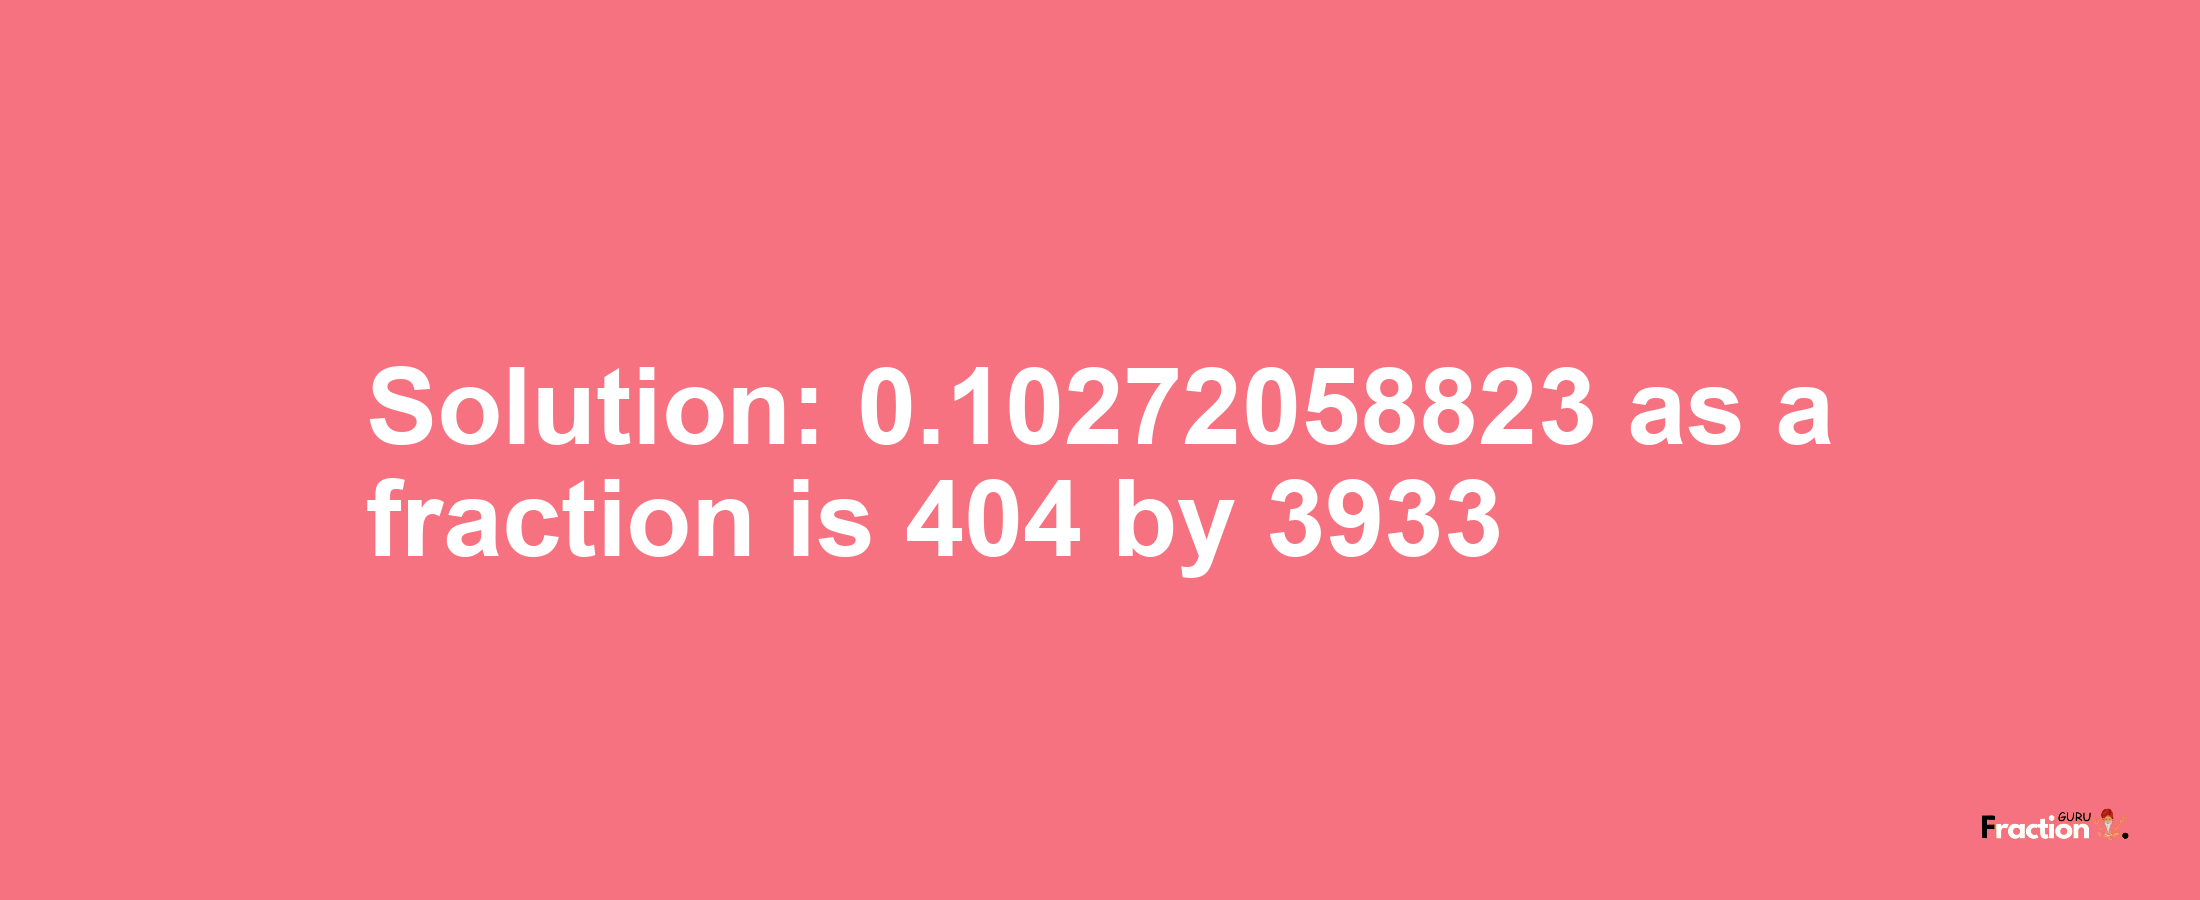 Solution:0.10272058823 as a fraction is 404/3933